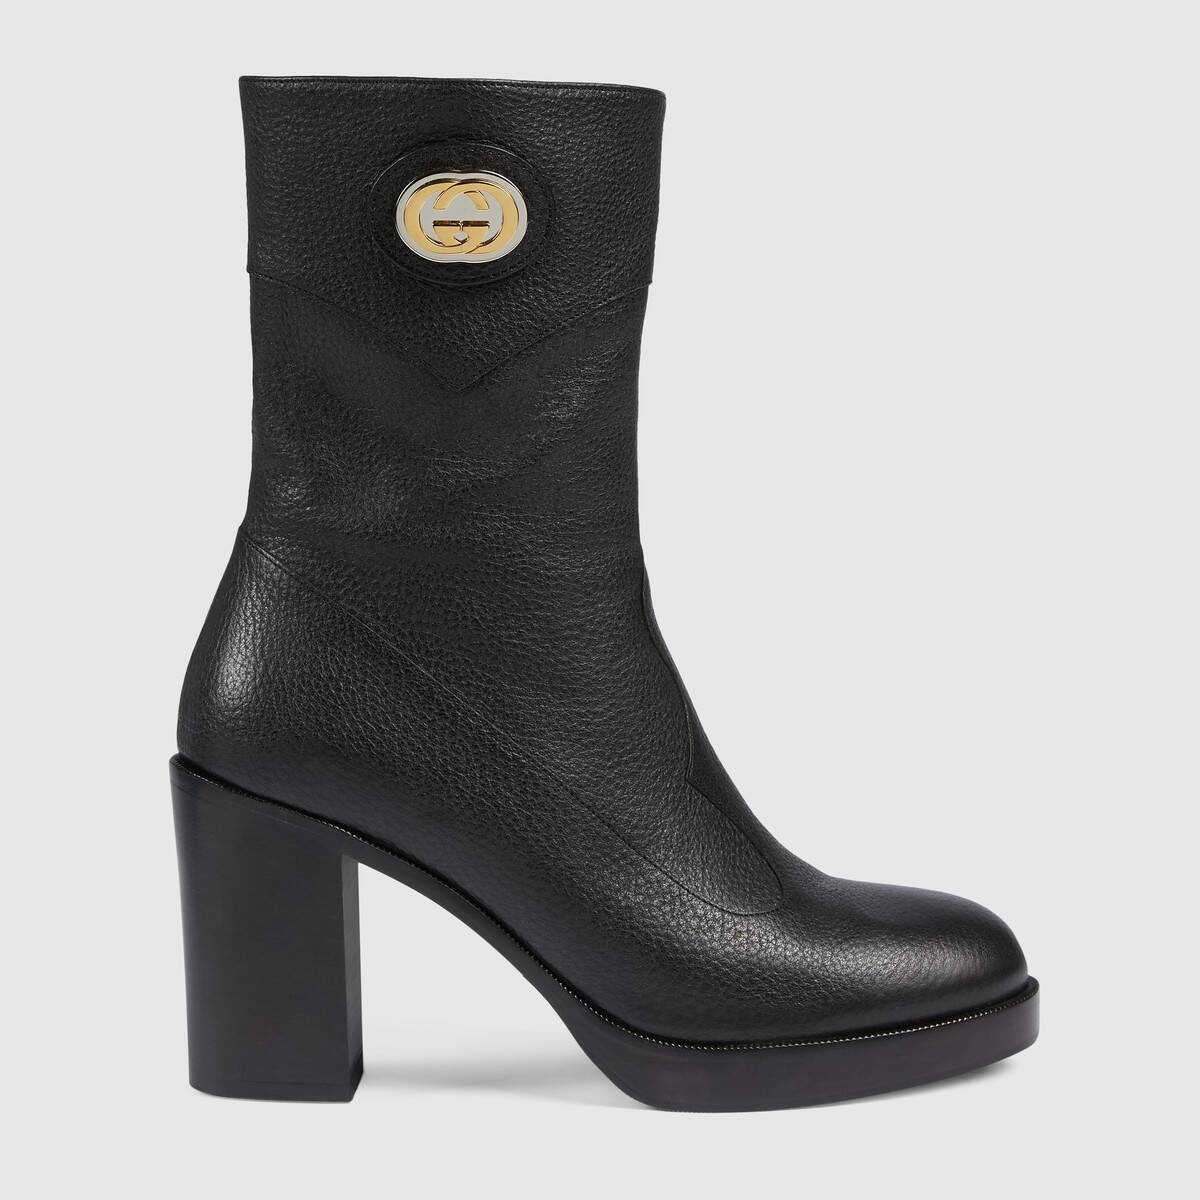 Women's ankle boot with Interlocking G - 1